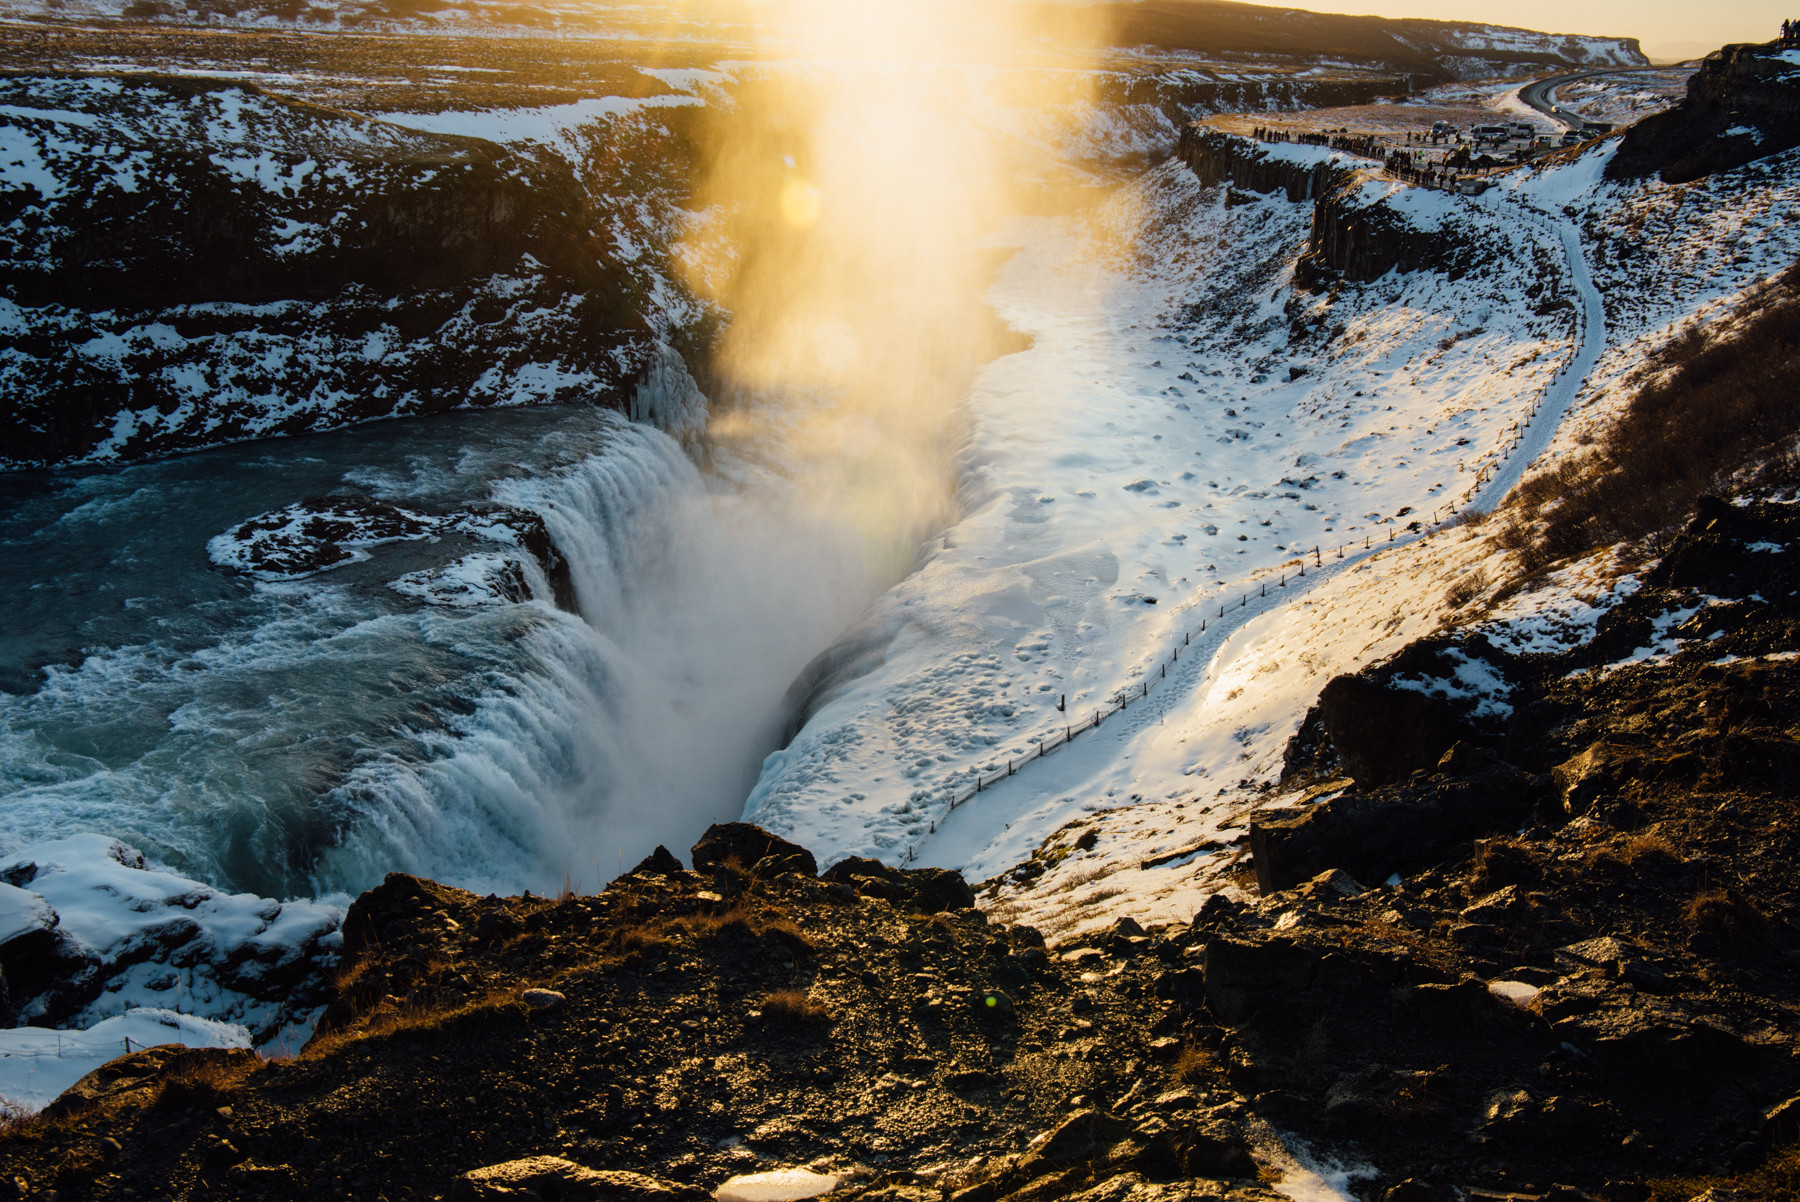 Iceland – Golden Circle, Gulfoss. Trip to Iceland with Katie and Holly 1/1-1/7.